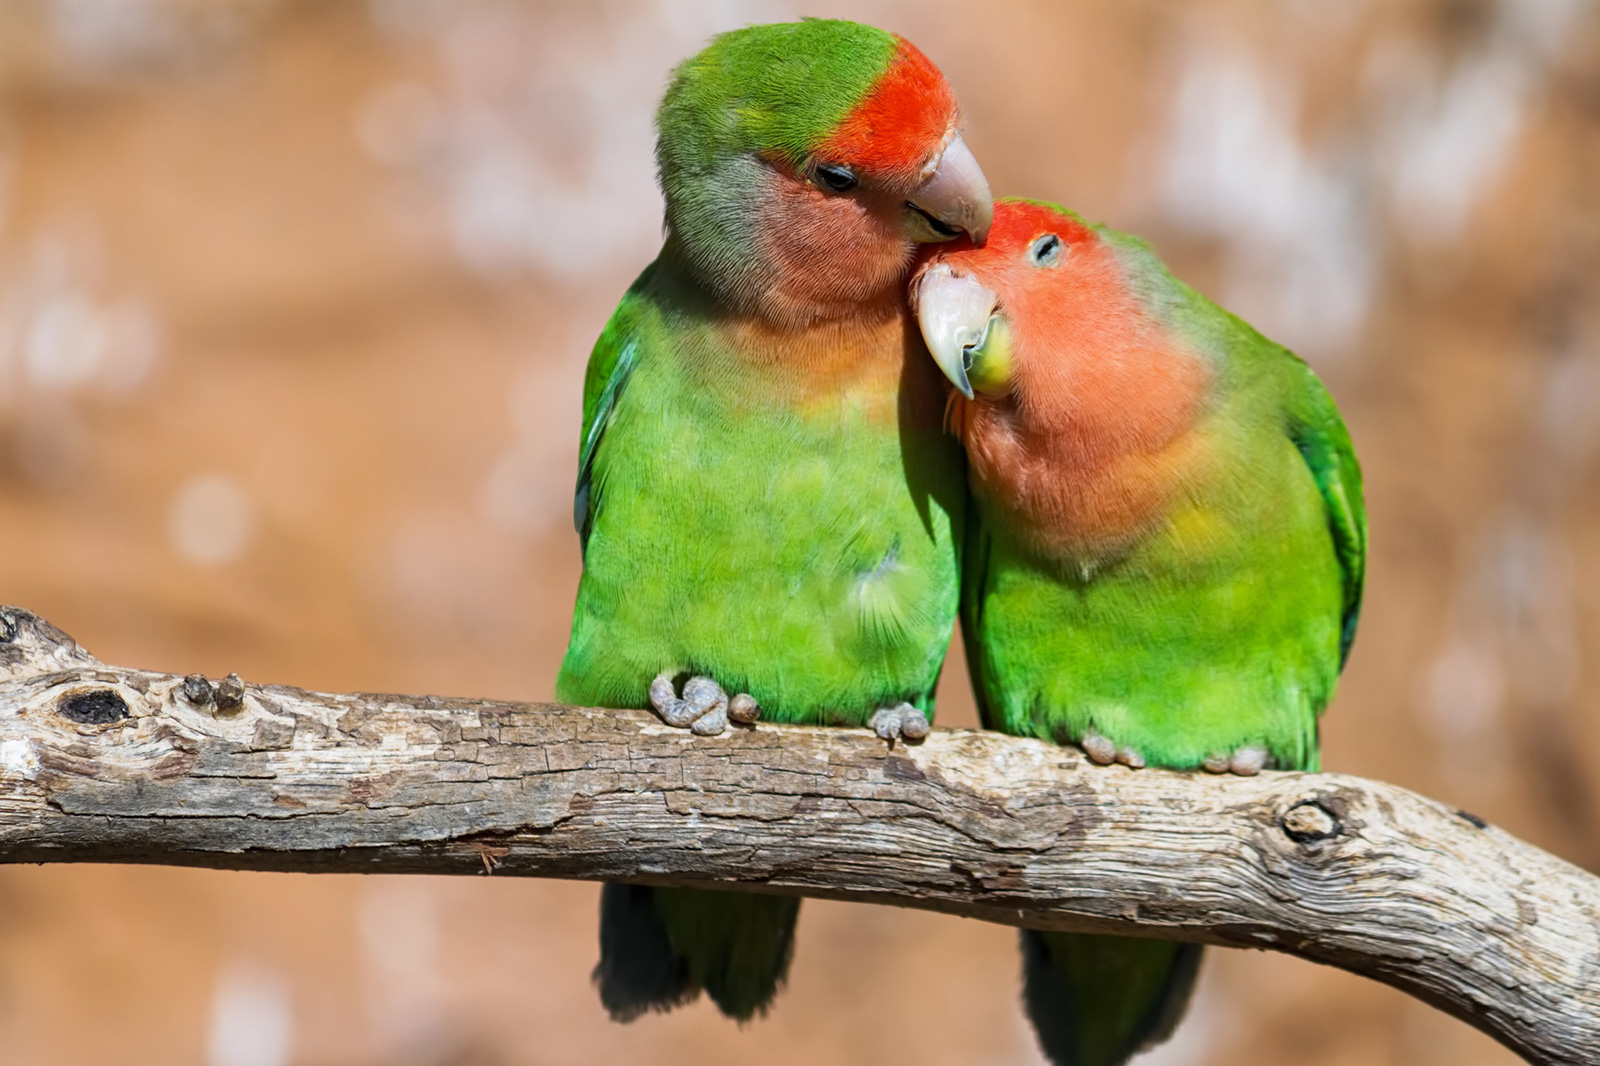 Are lovebirds easy pets?